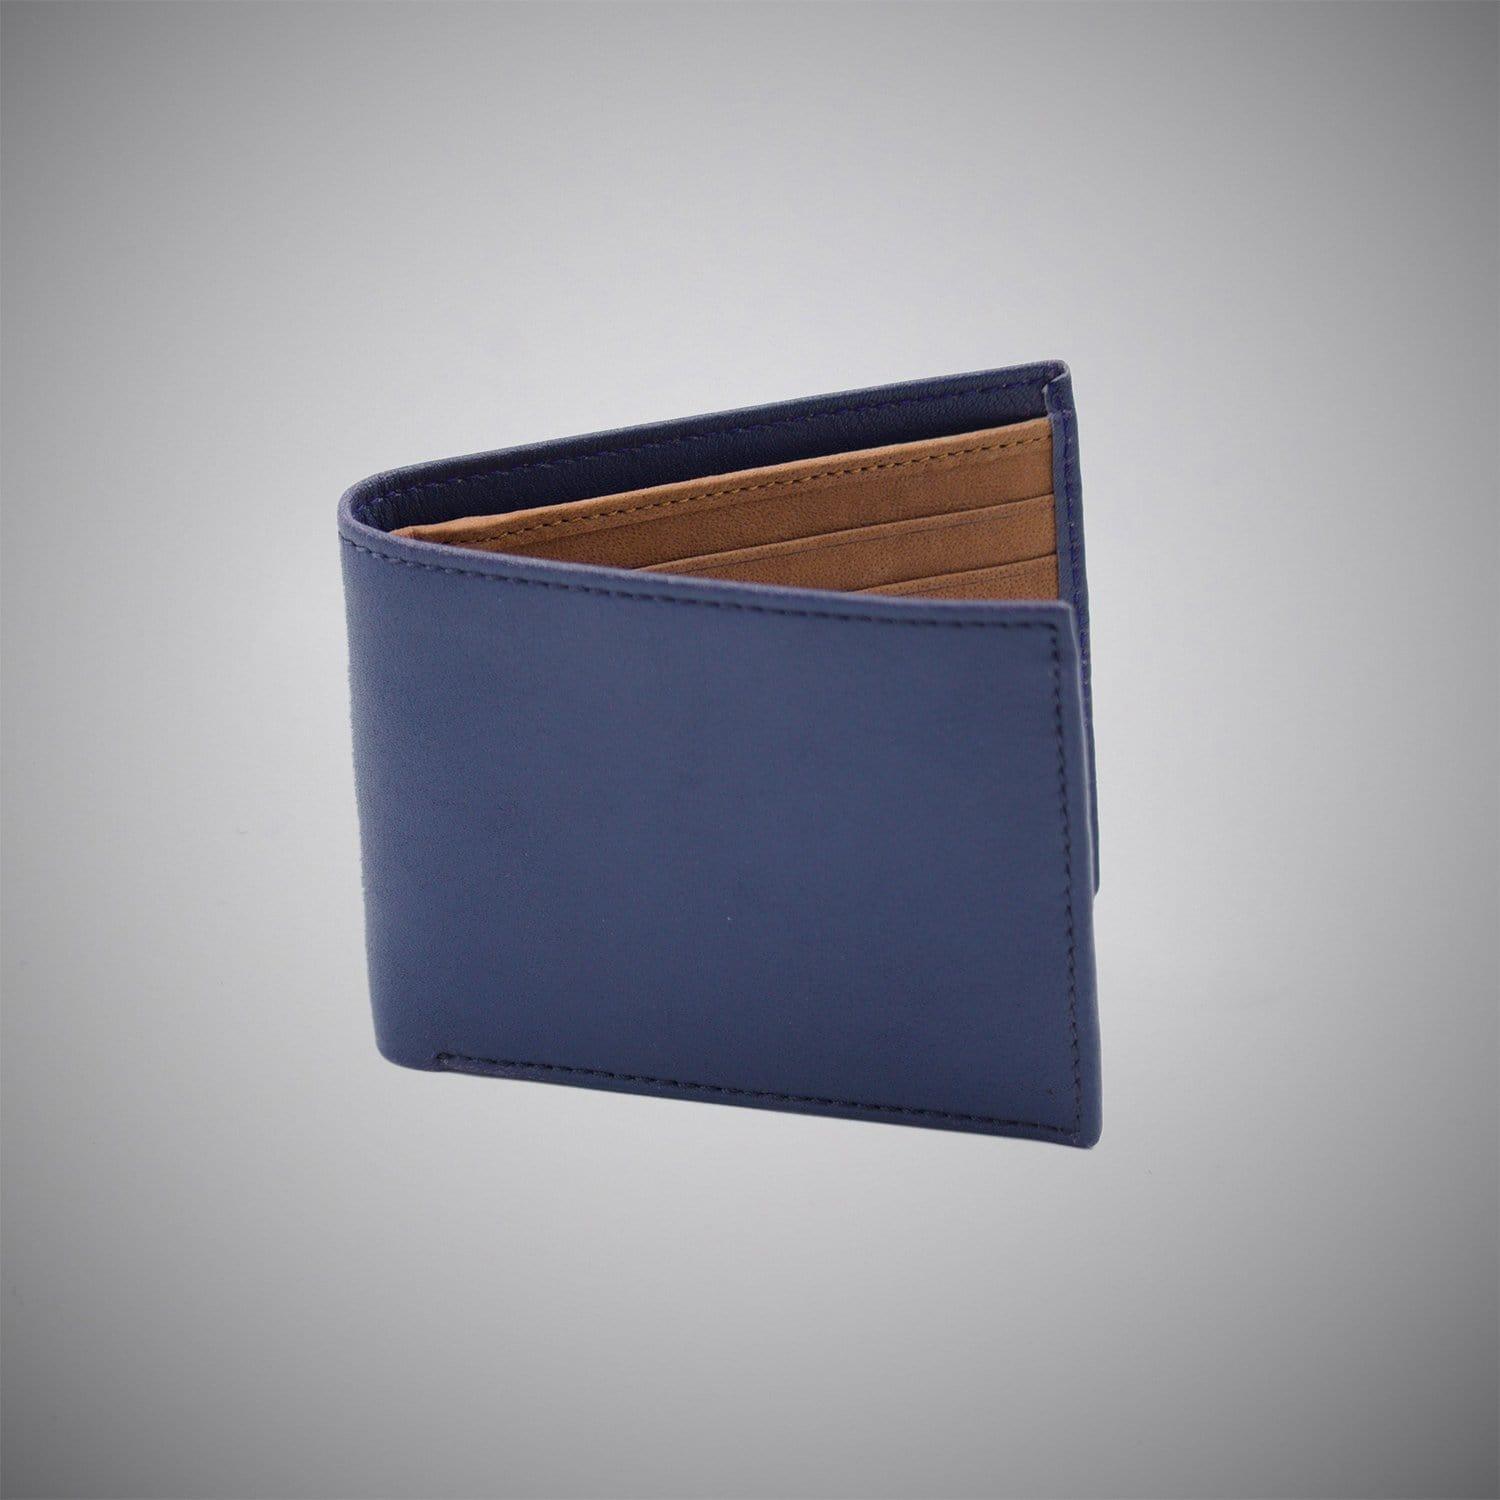 Smooth Blue Toned Leather Wallet With Tan Suede Interior - Just White Shirts